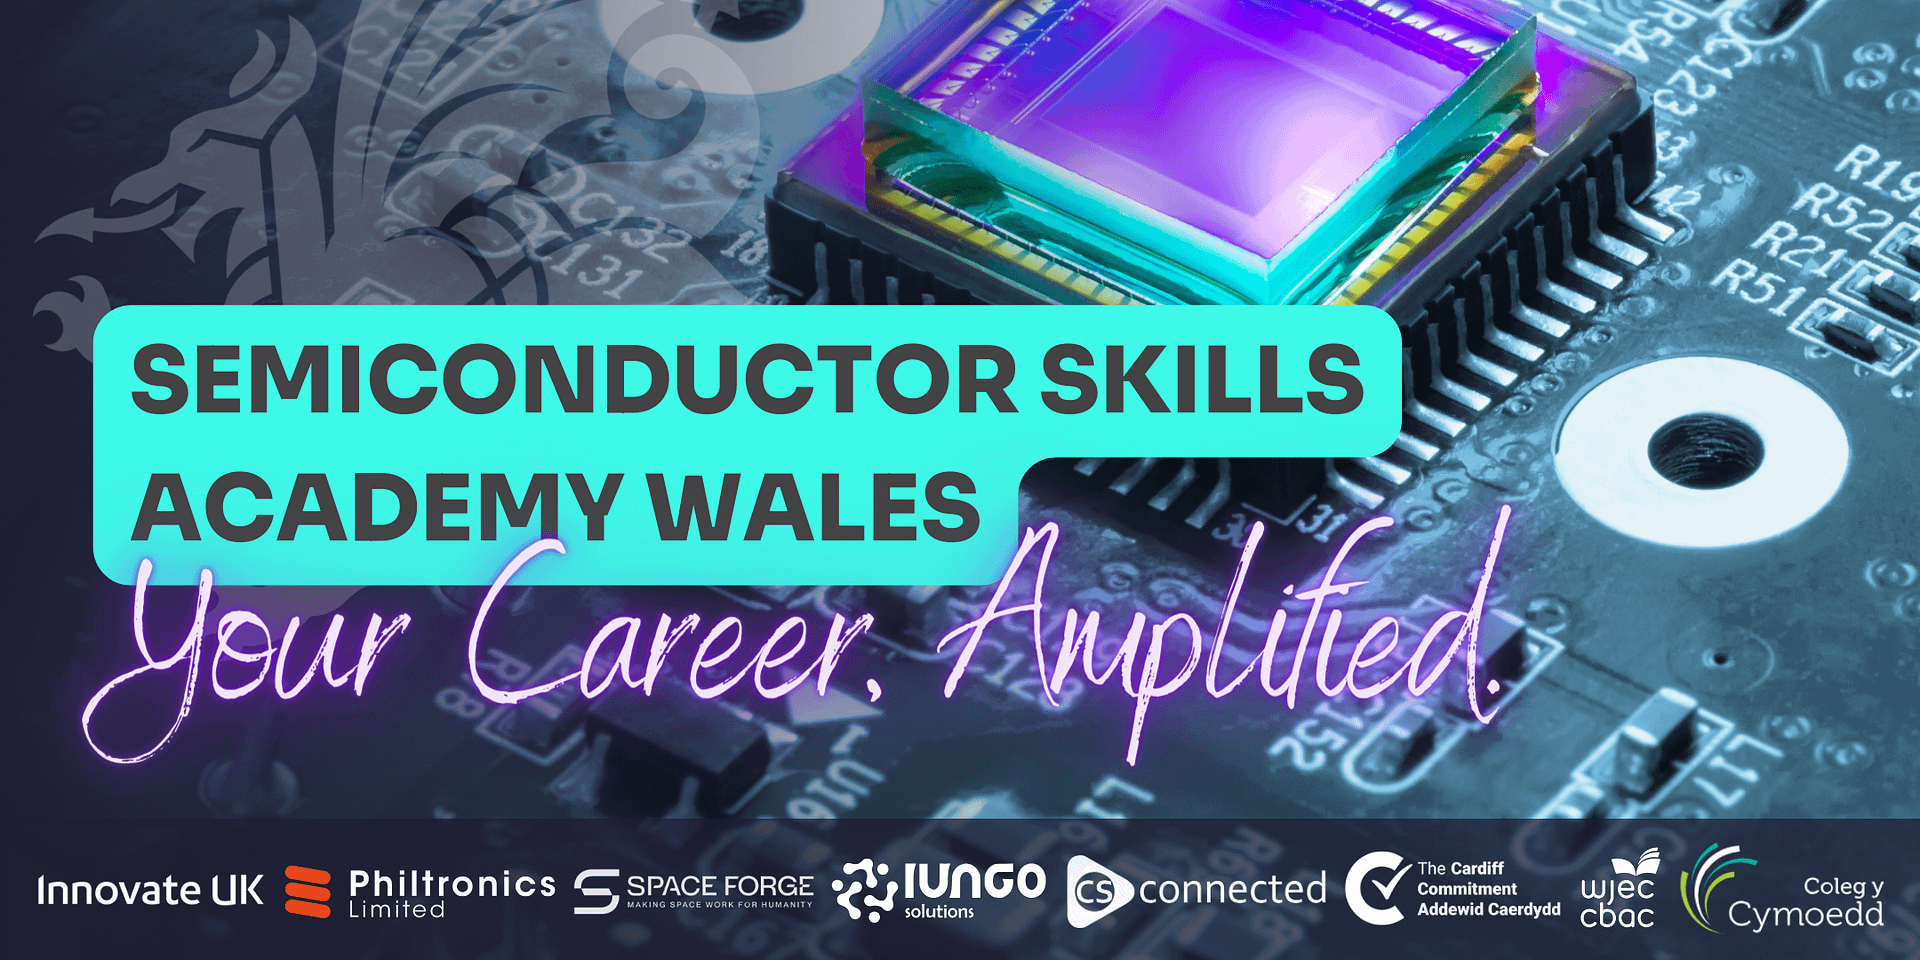 Ready to Amplify your Career in the Semiconductor Industry?